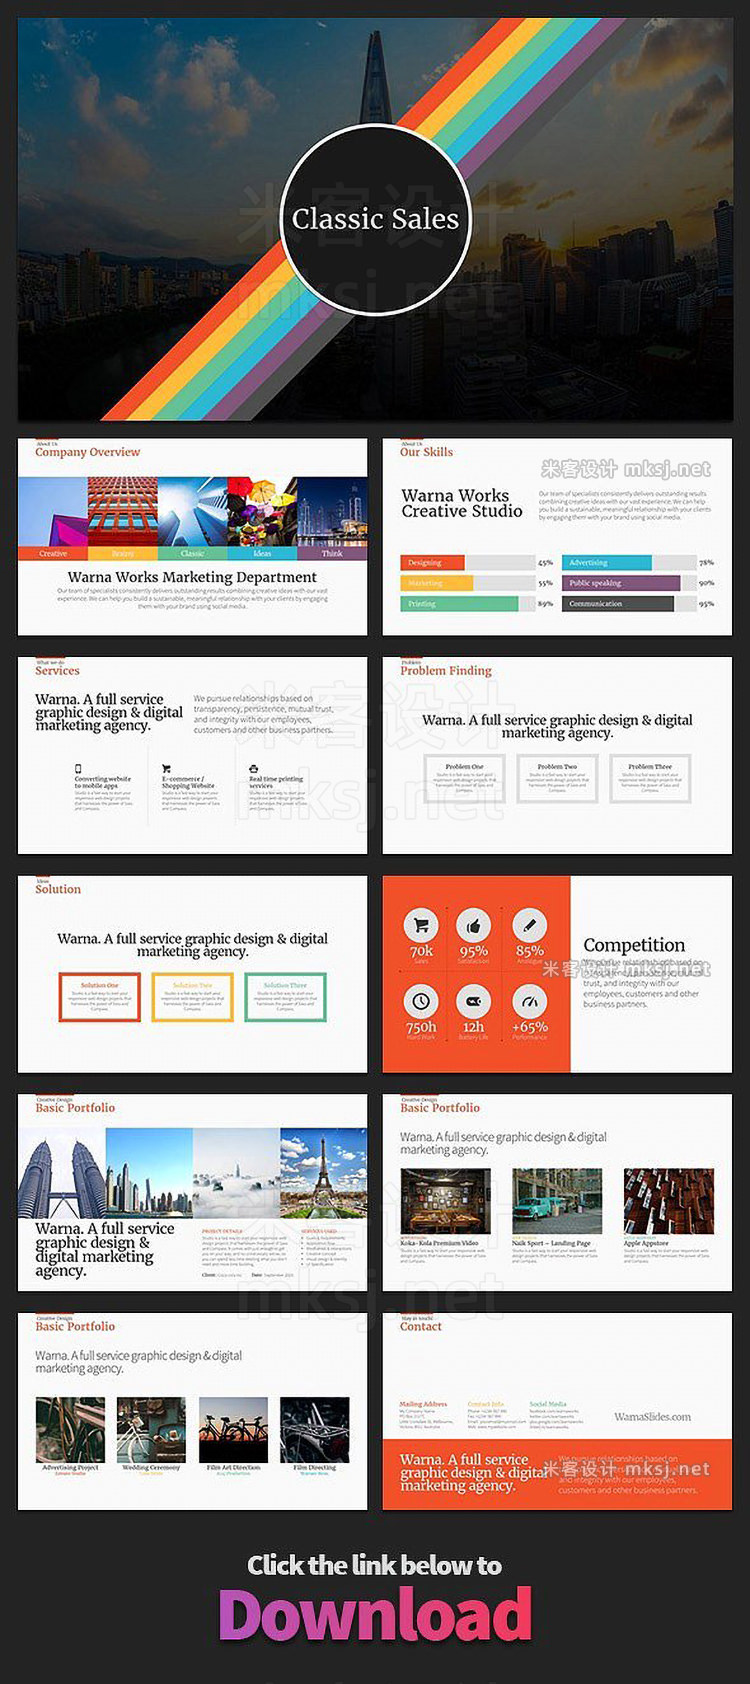 PPT模板 Classic Serif PowerPoint Template